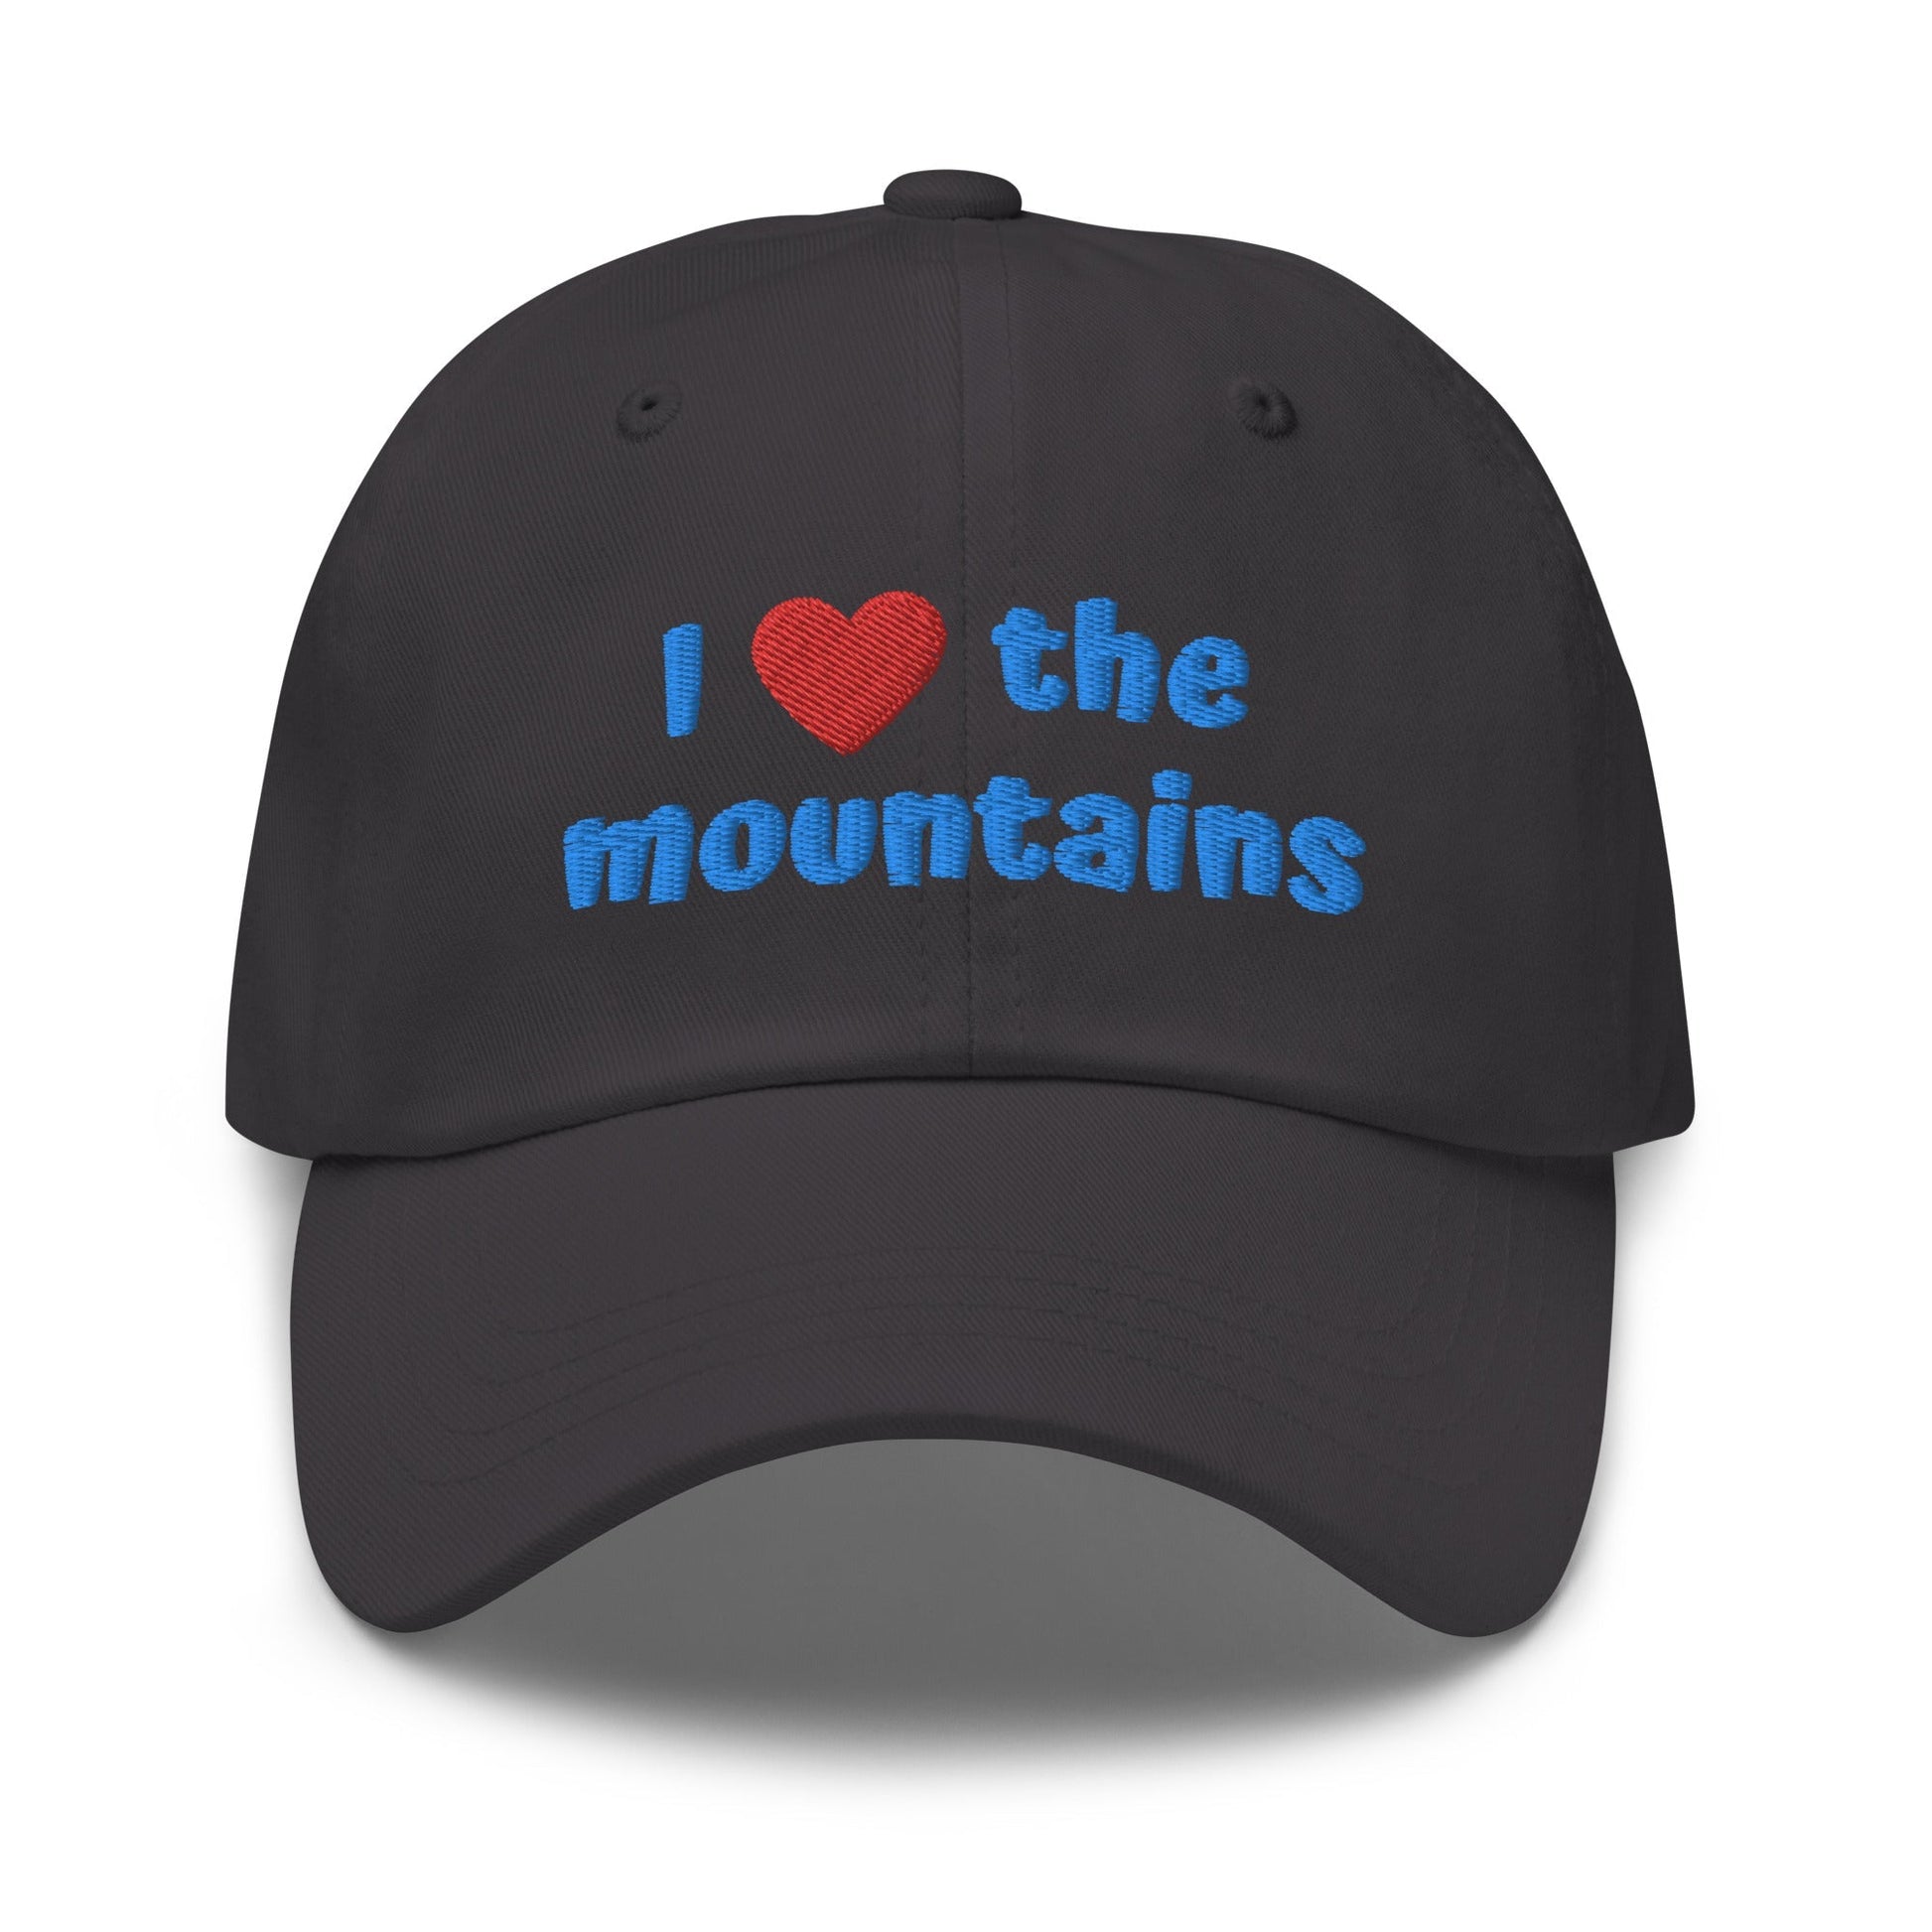 I HEART the Mountains | Dad Hat